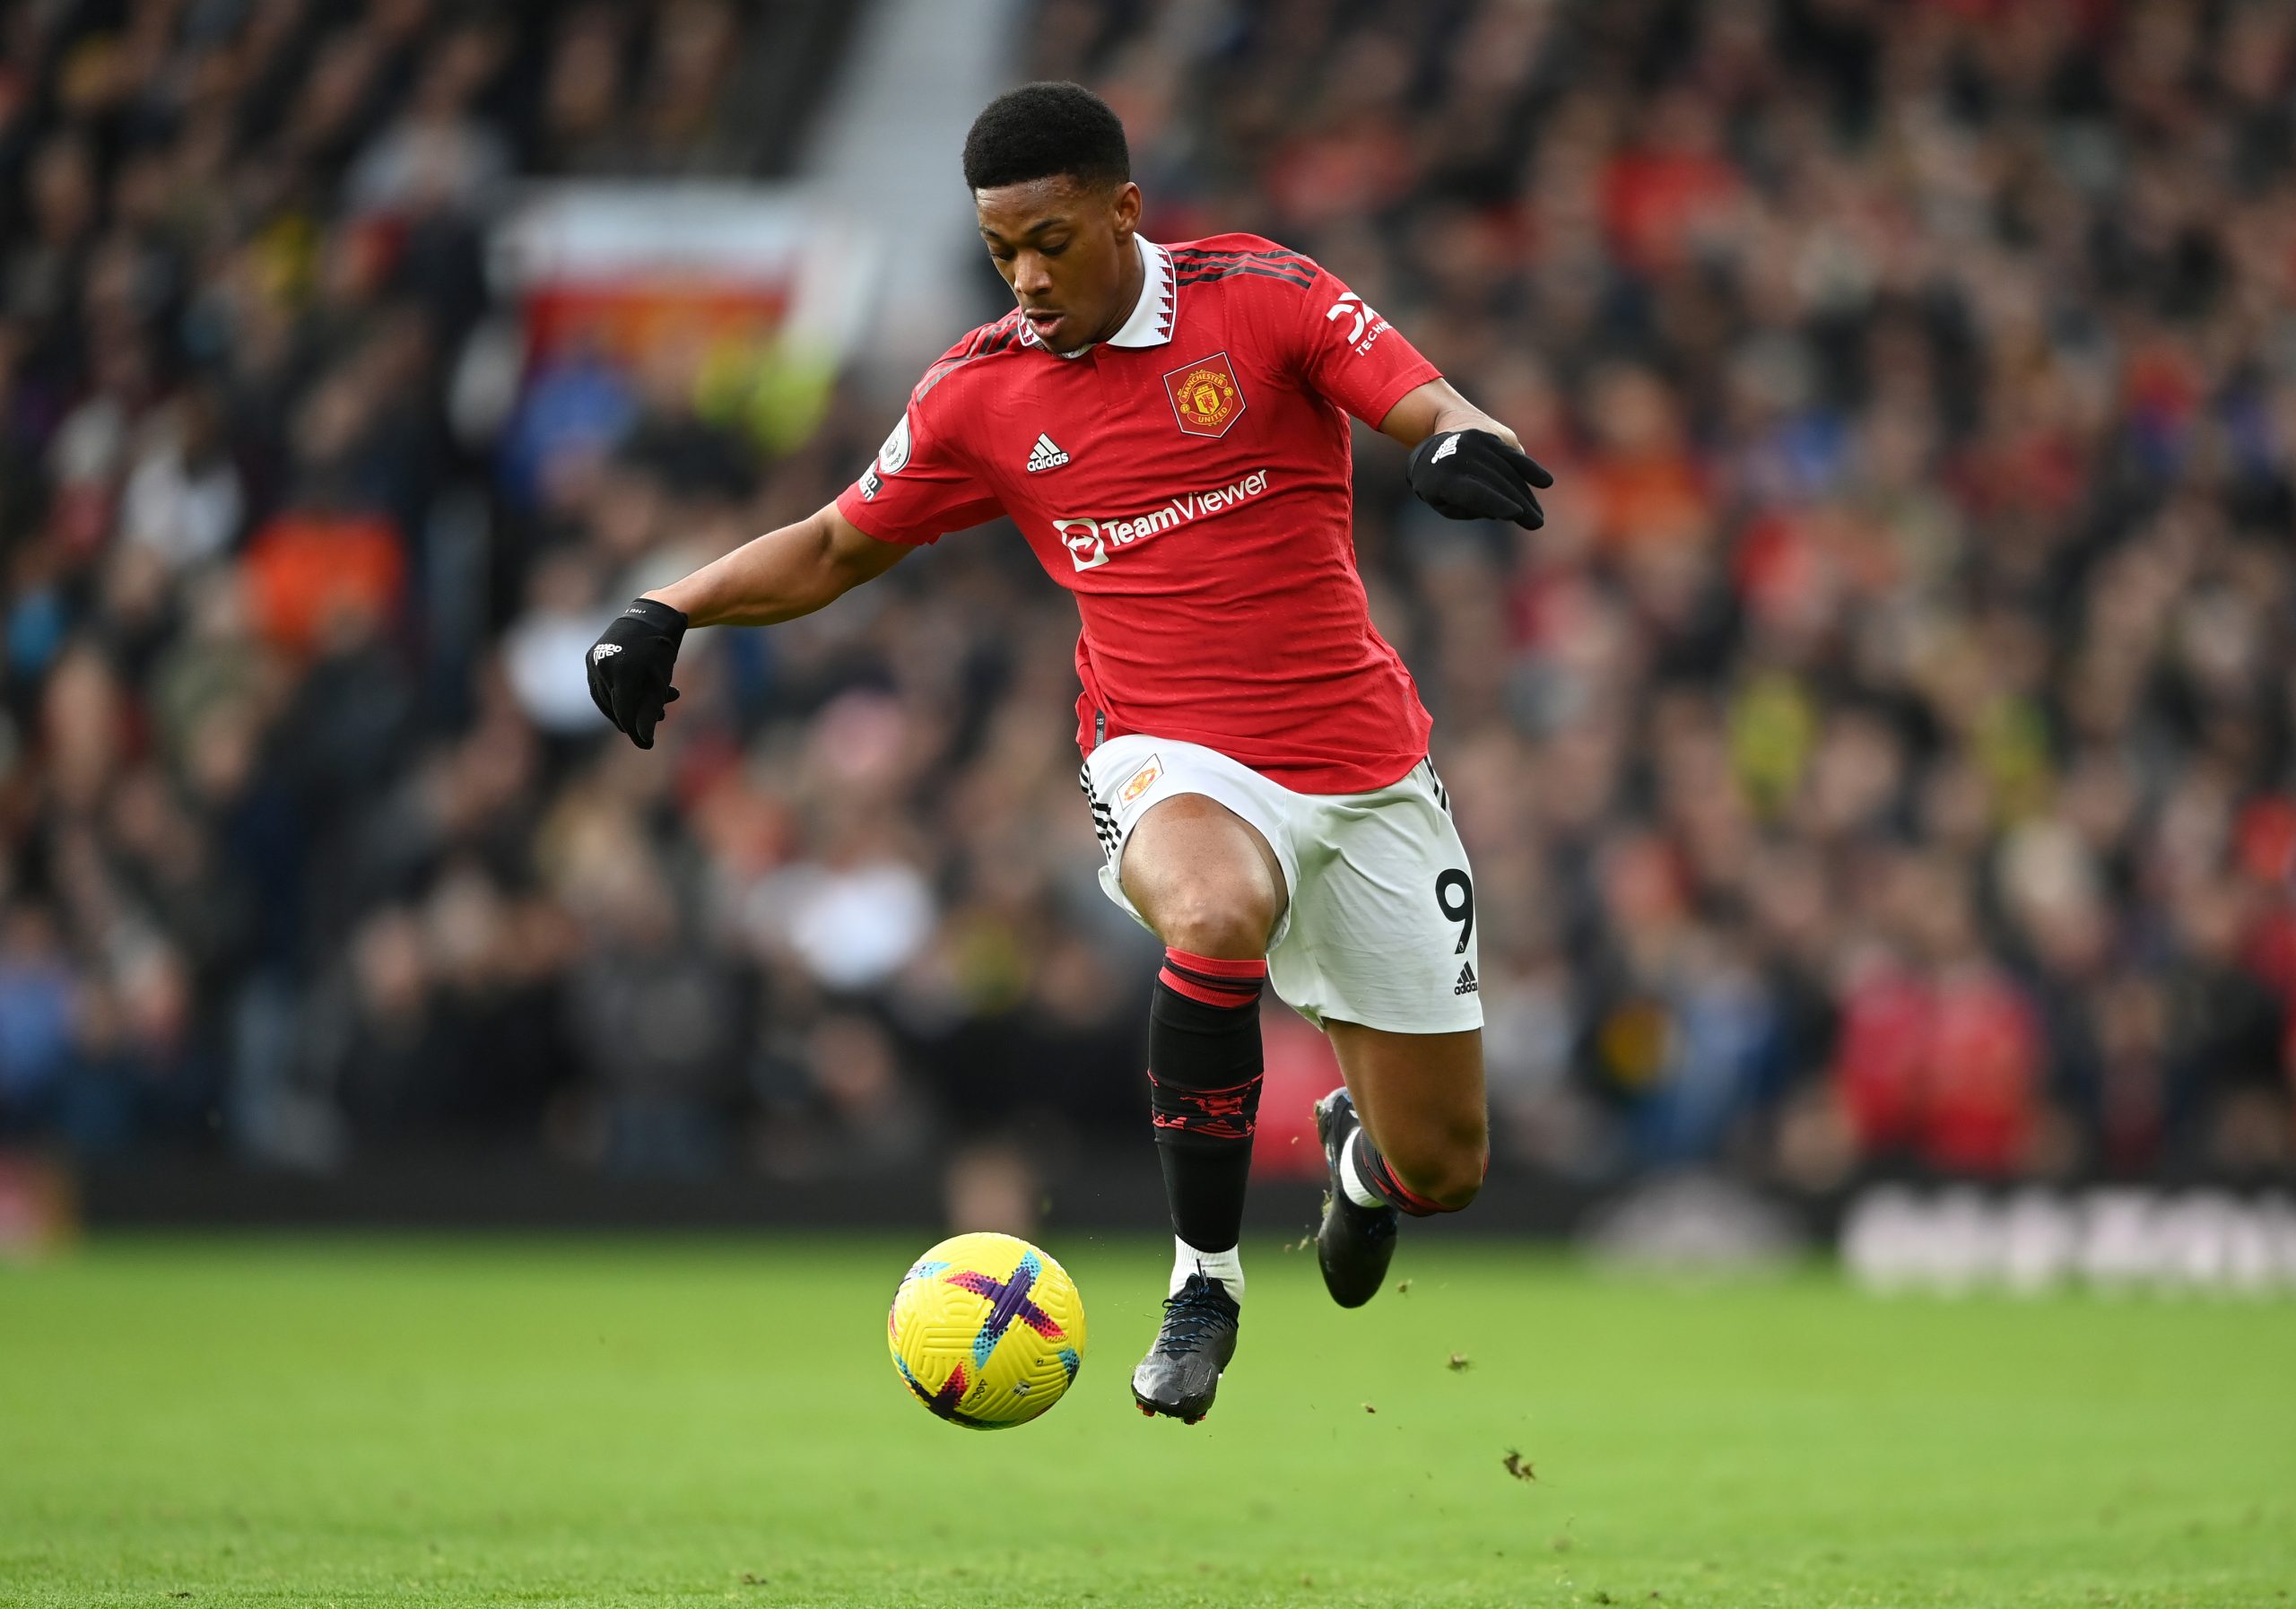 Anthony Martial of Manchester United controls the ball during the Premier League match between Manchester United and Manchester City at Old Trafford on January 14, 2023 in Manchester, England. (Photo by Michael Regan/Getty Images)